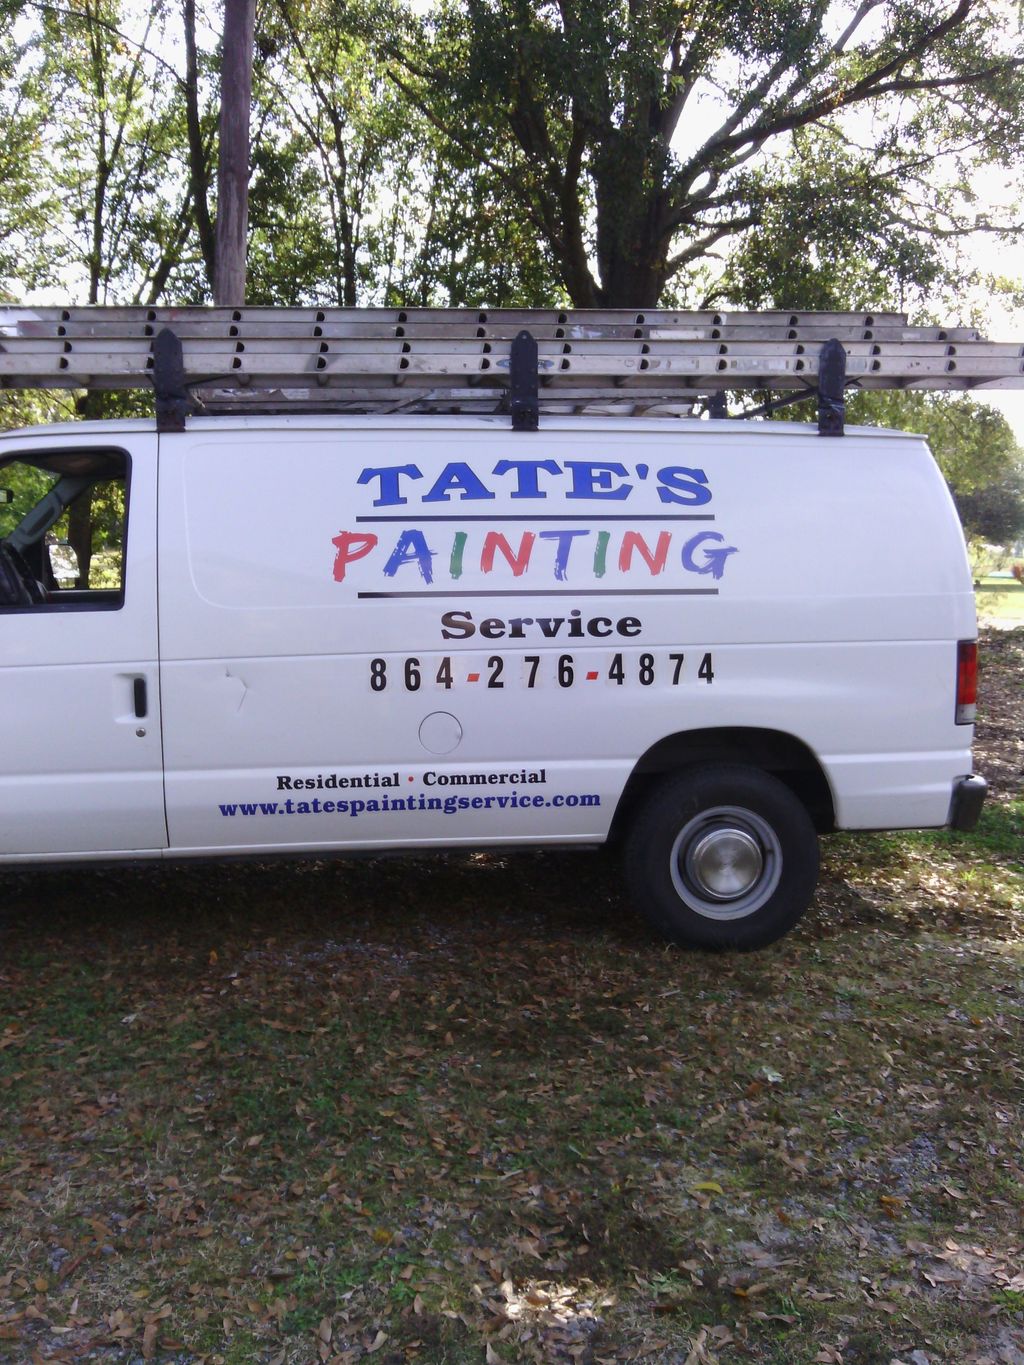 Tate's painting service